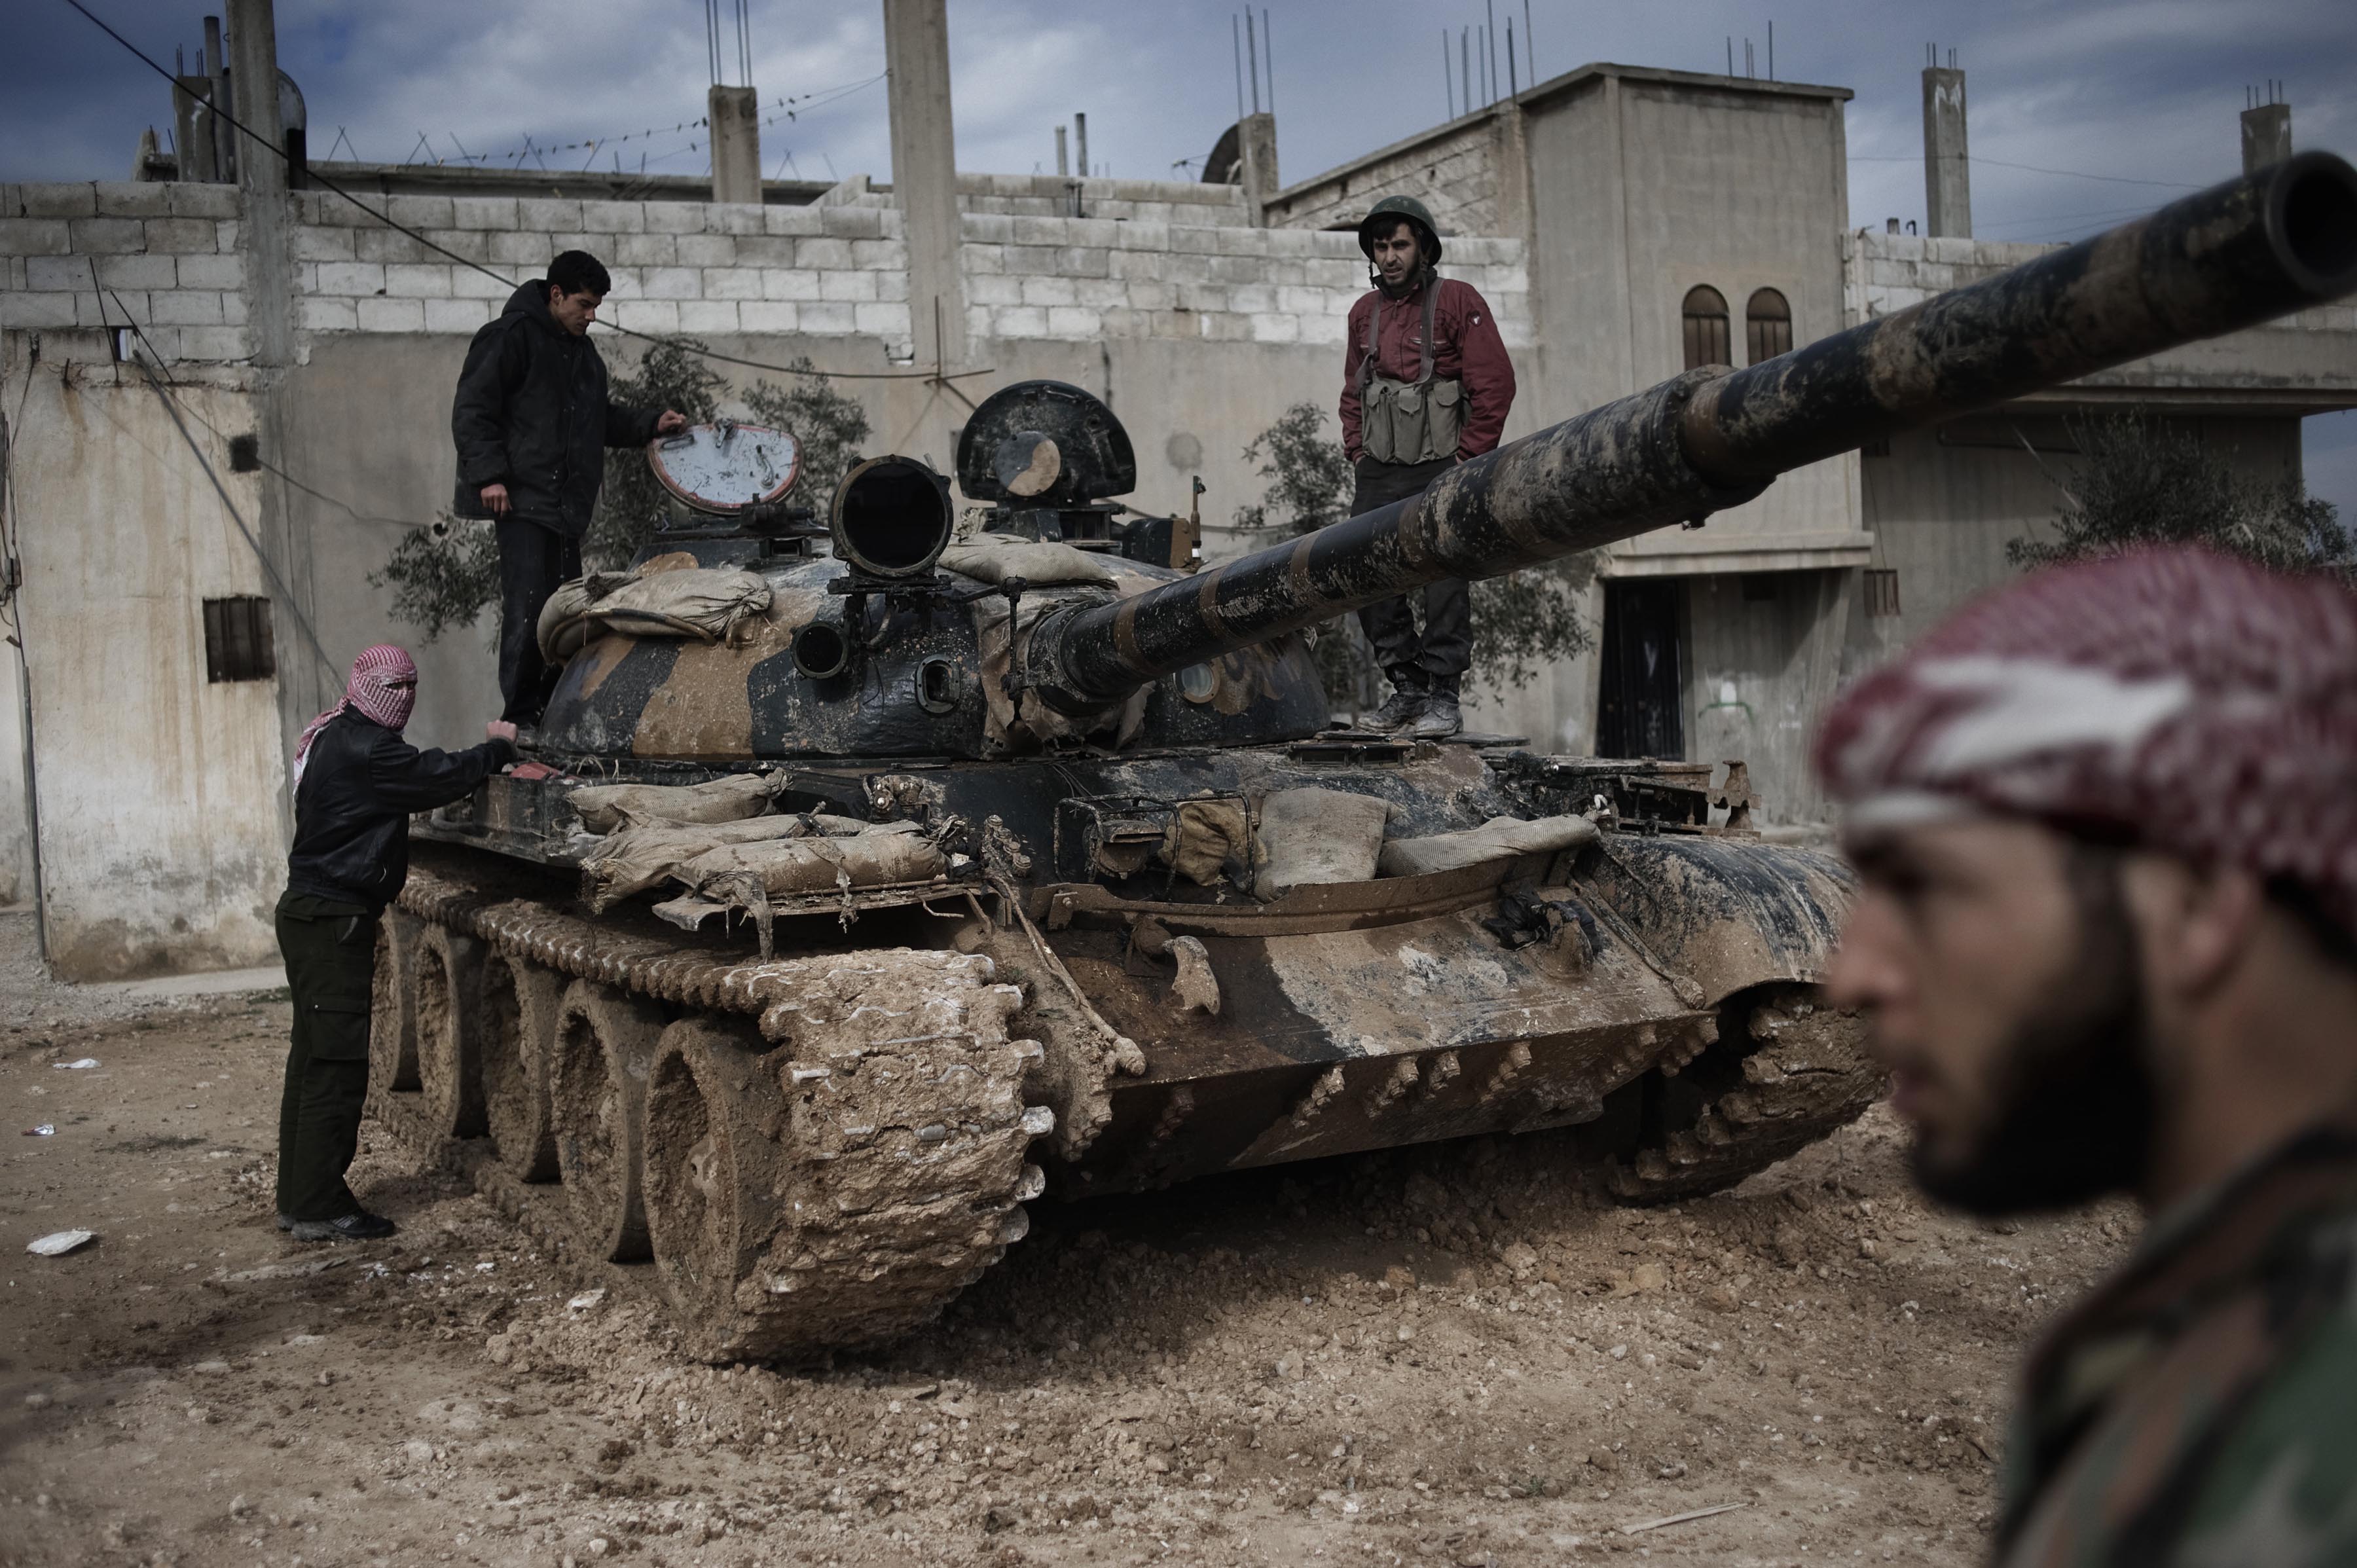 Feb. 23, 2012. A Free Syrian Army member prepares to fight with a tank whose crew defected from government forces in al-Qsair.